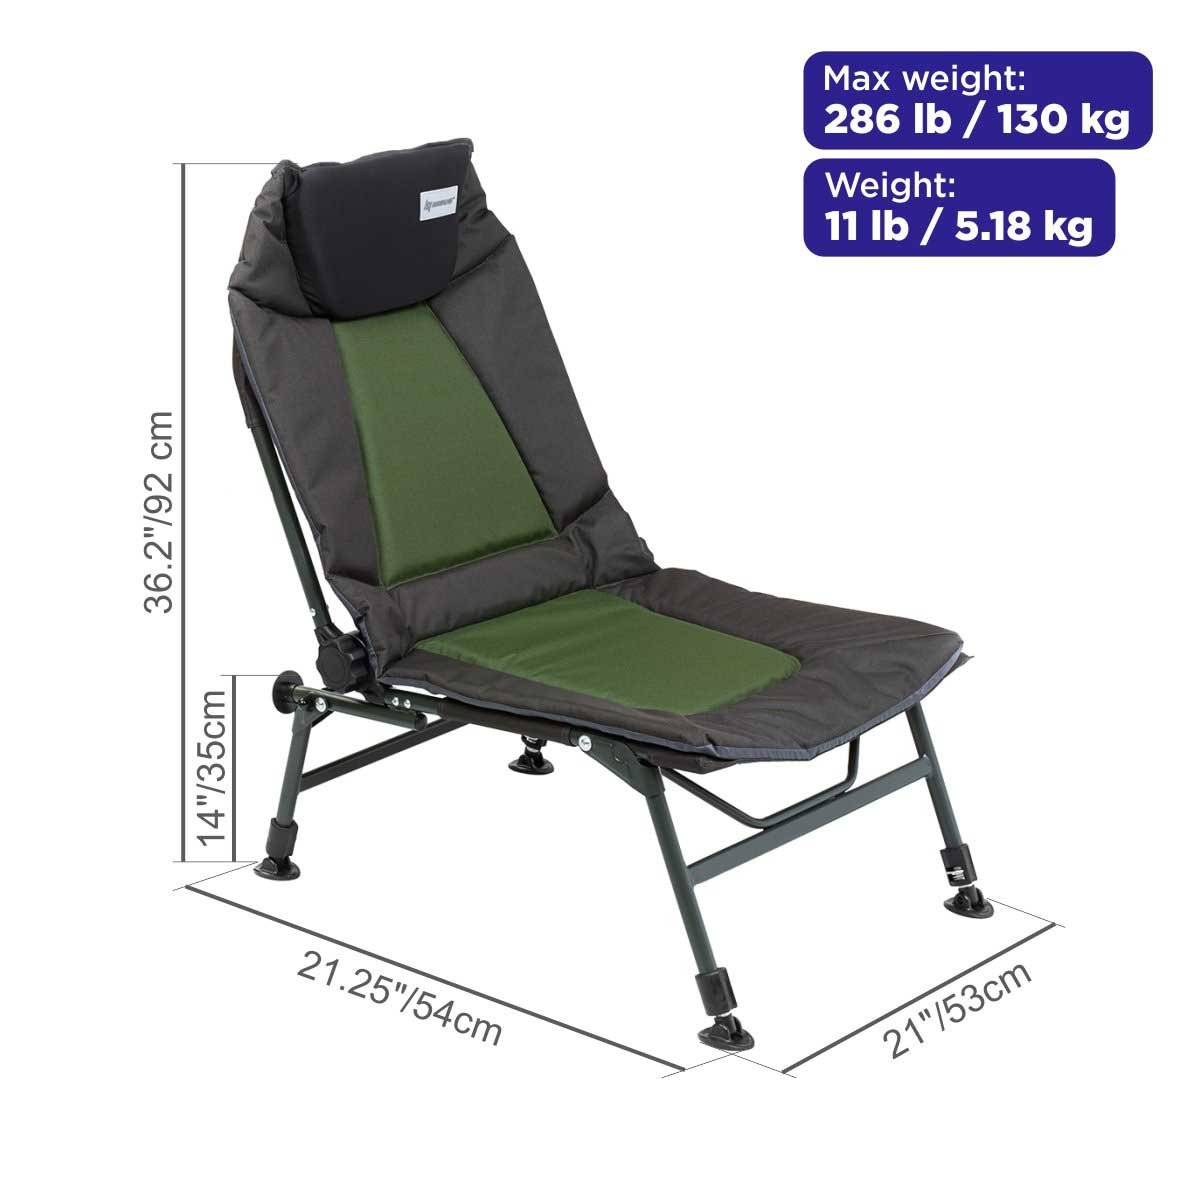 Set of 2 of Reclining Camping Lounger Chair for Outdoor